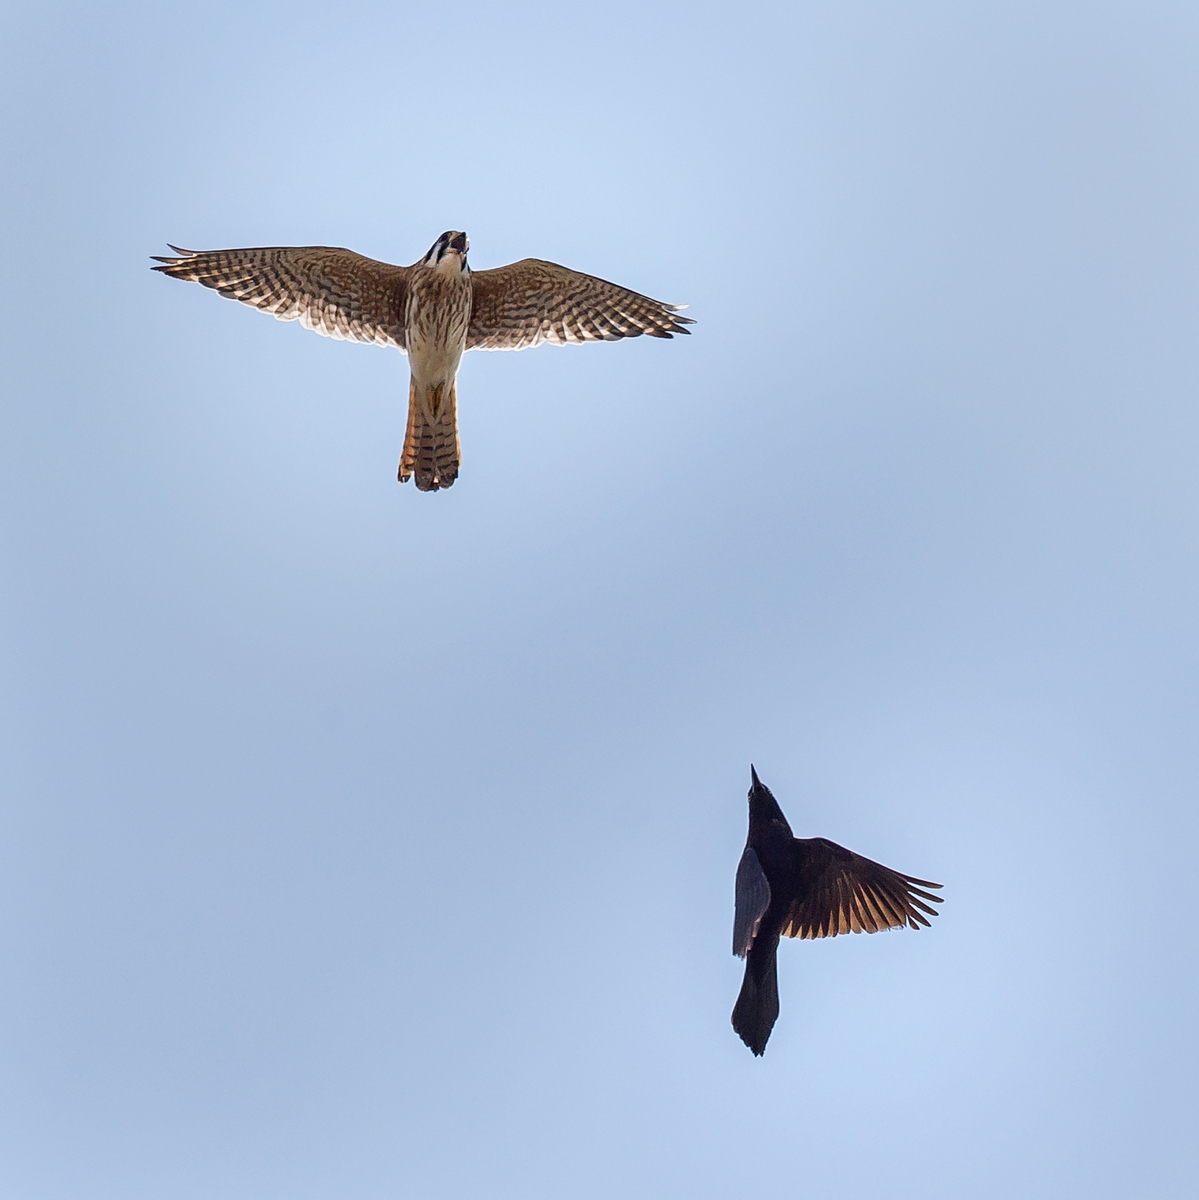 The female Kestrel isn't safe from harassment; a Common Grackle approaches from below. 